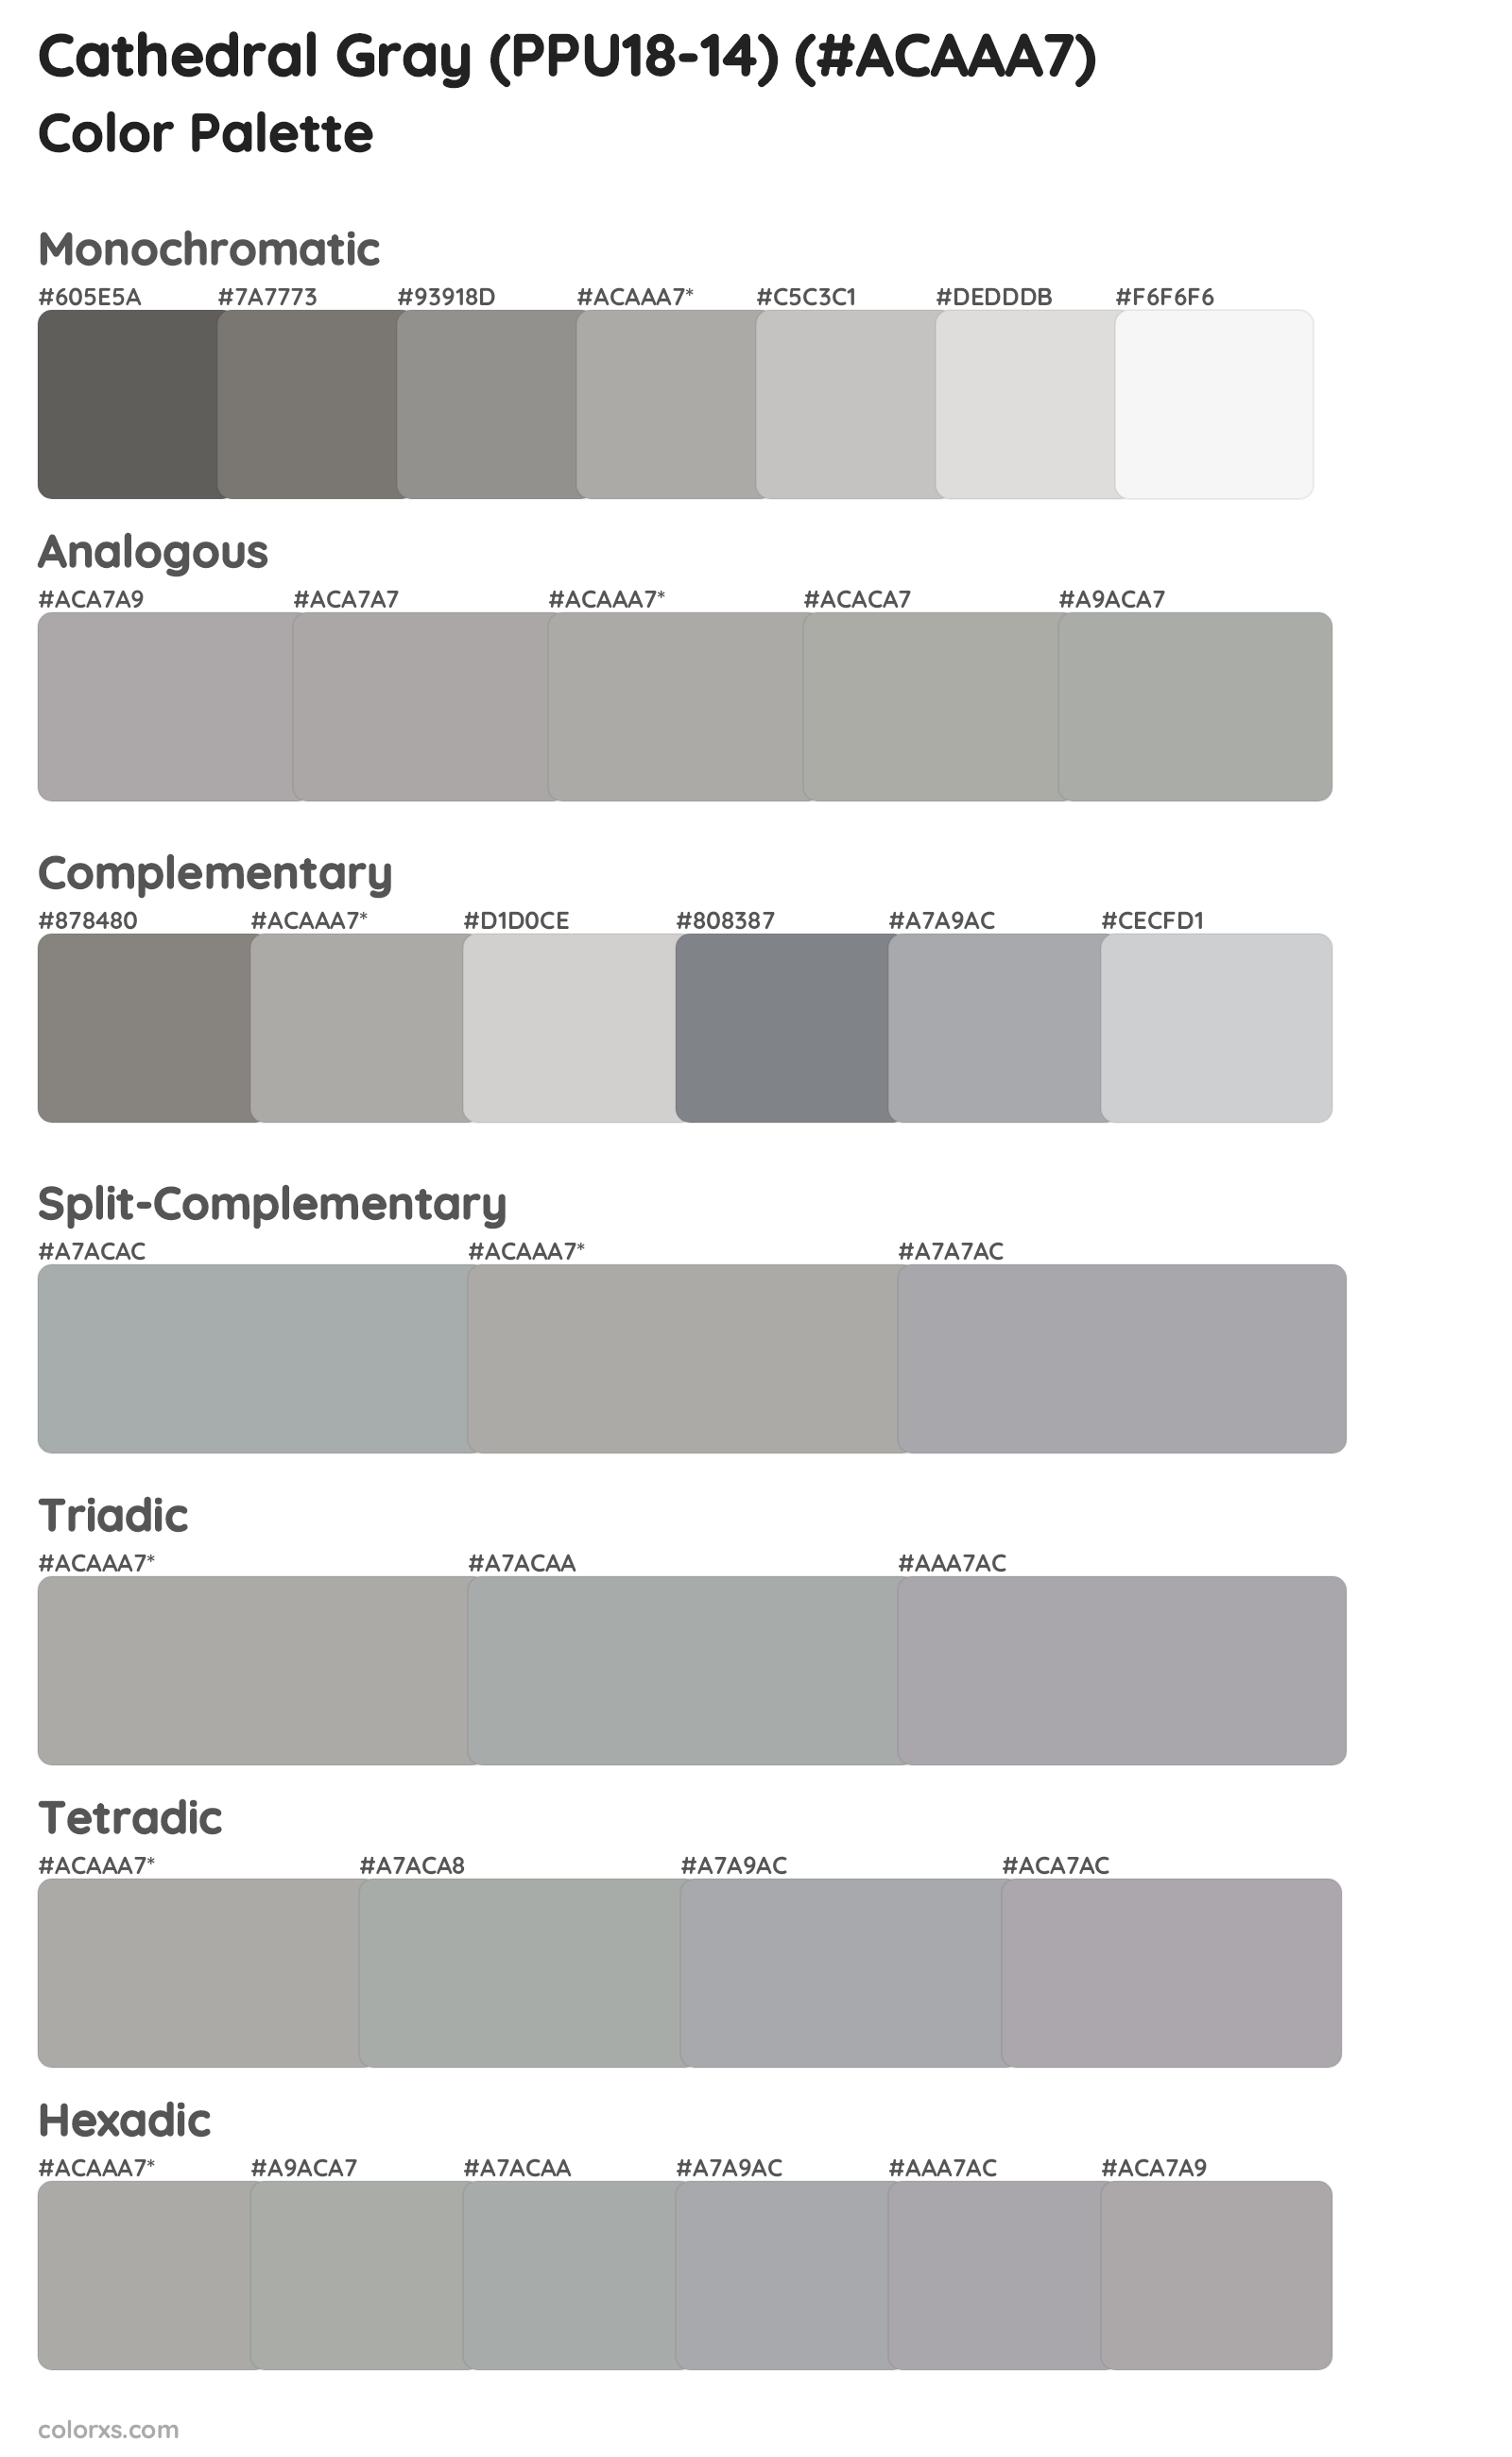 Cathedral Gray (PPU18-14) Color Scheme Palettes